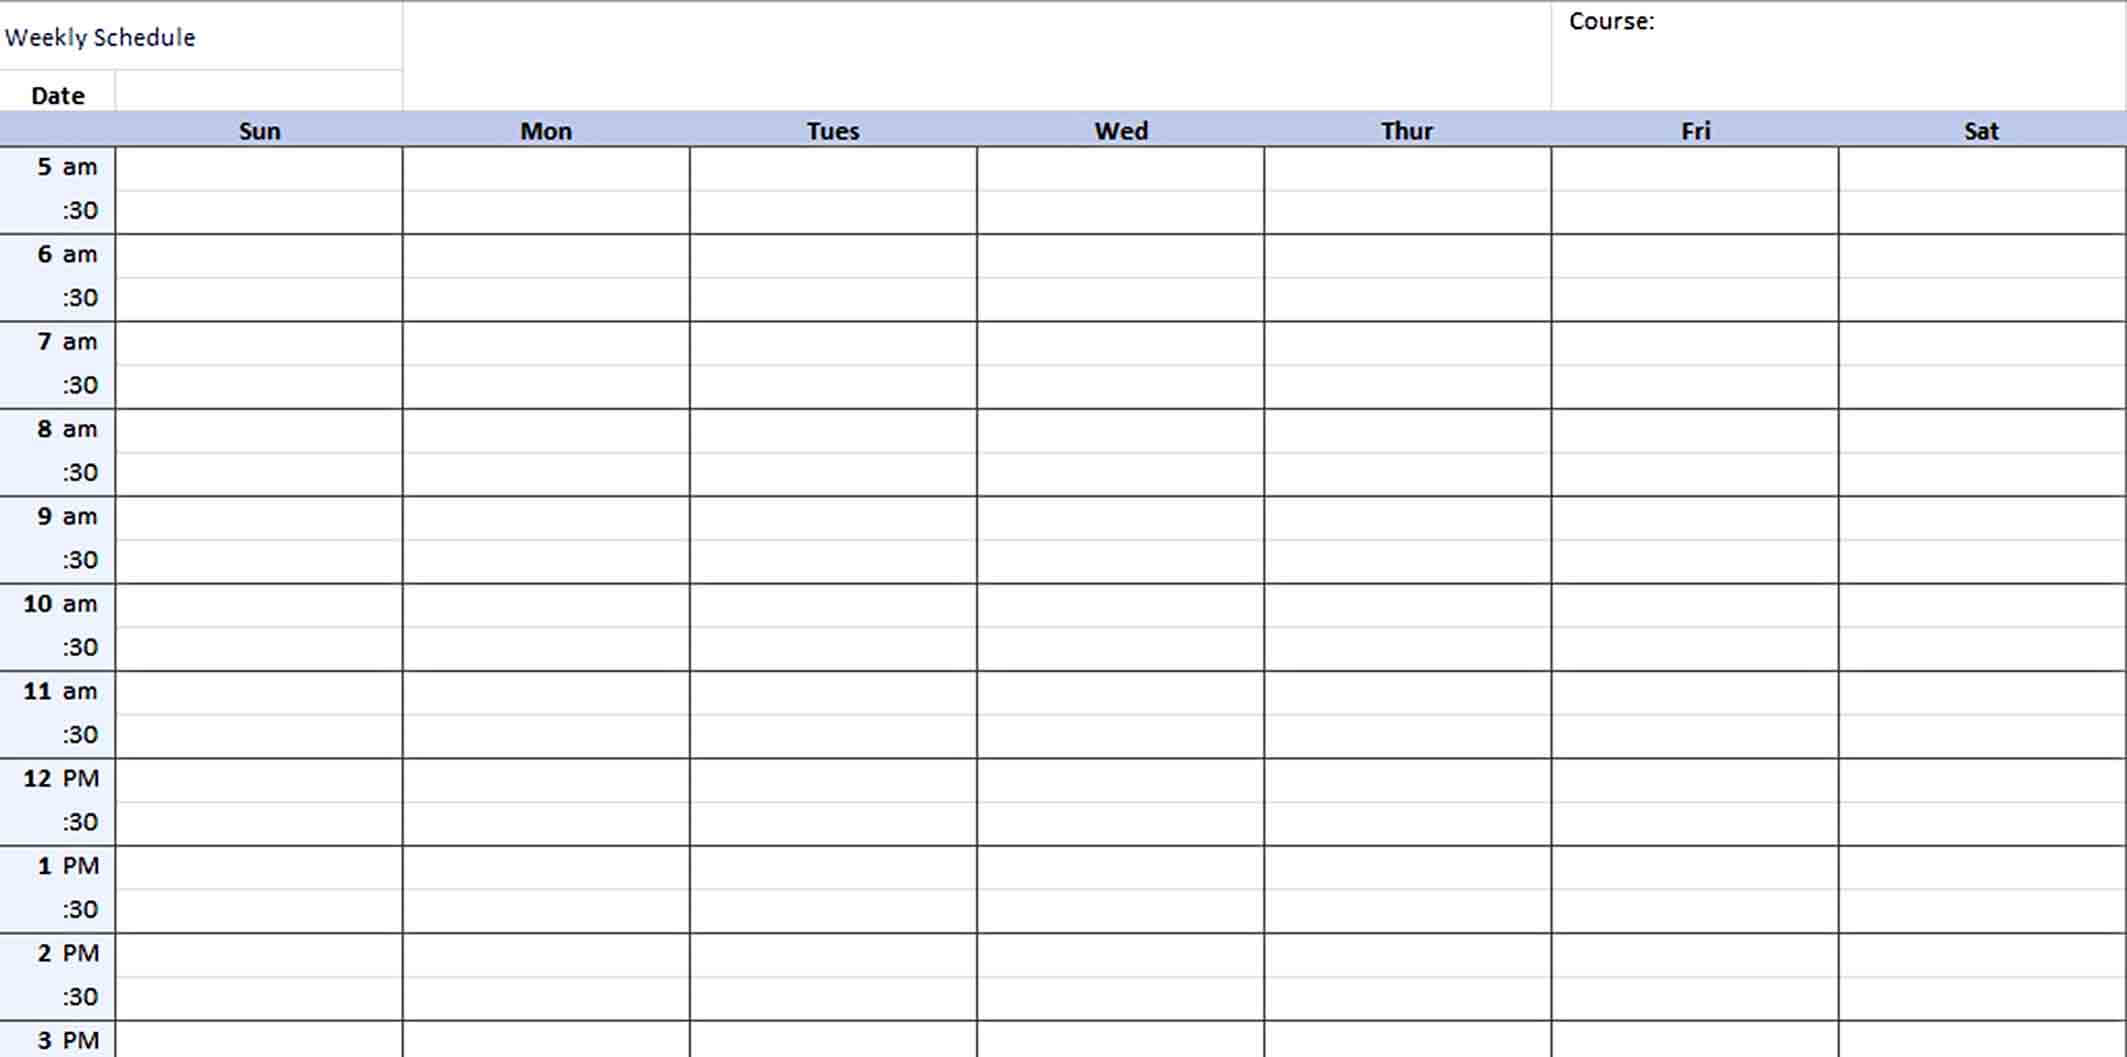 Excel Free Weekly Schedule Template.doc